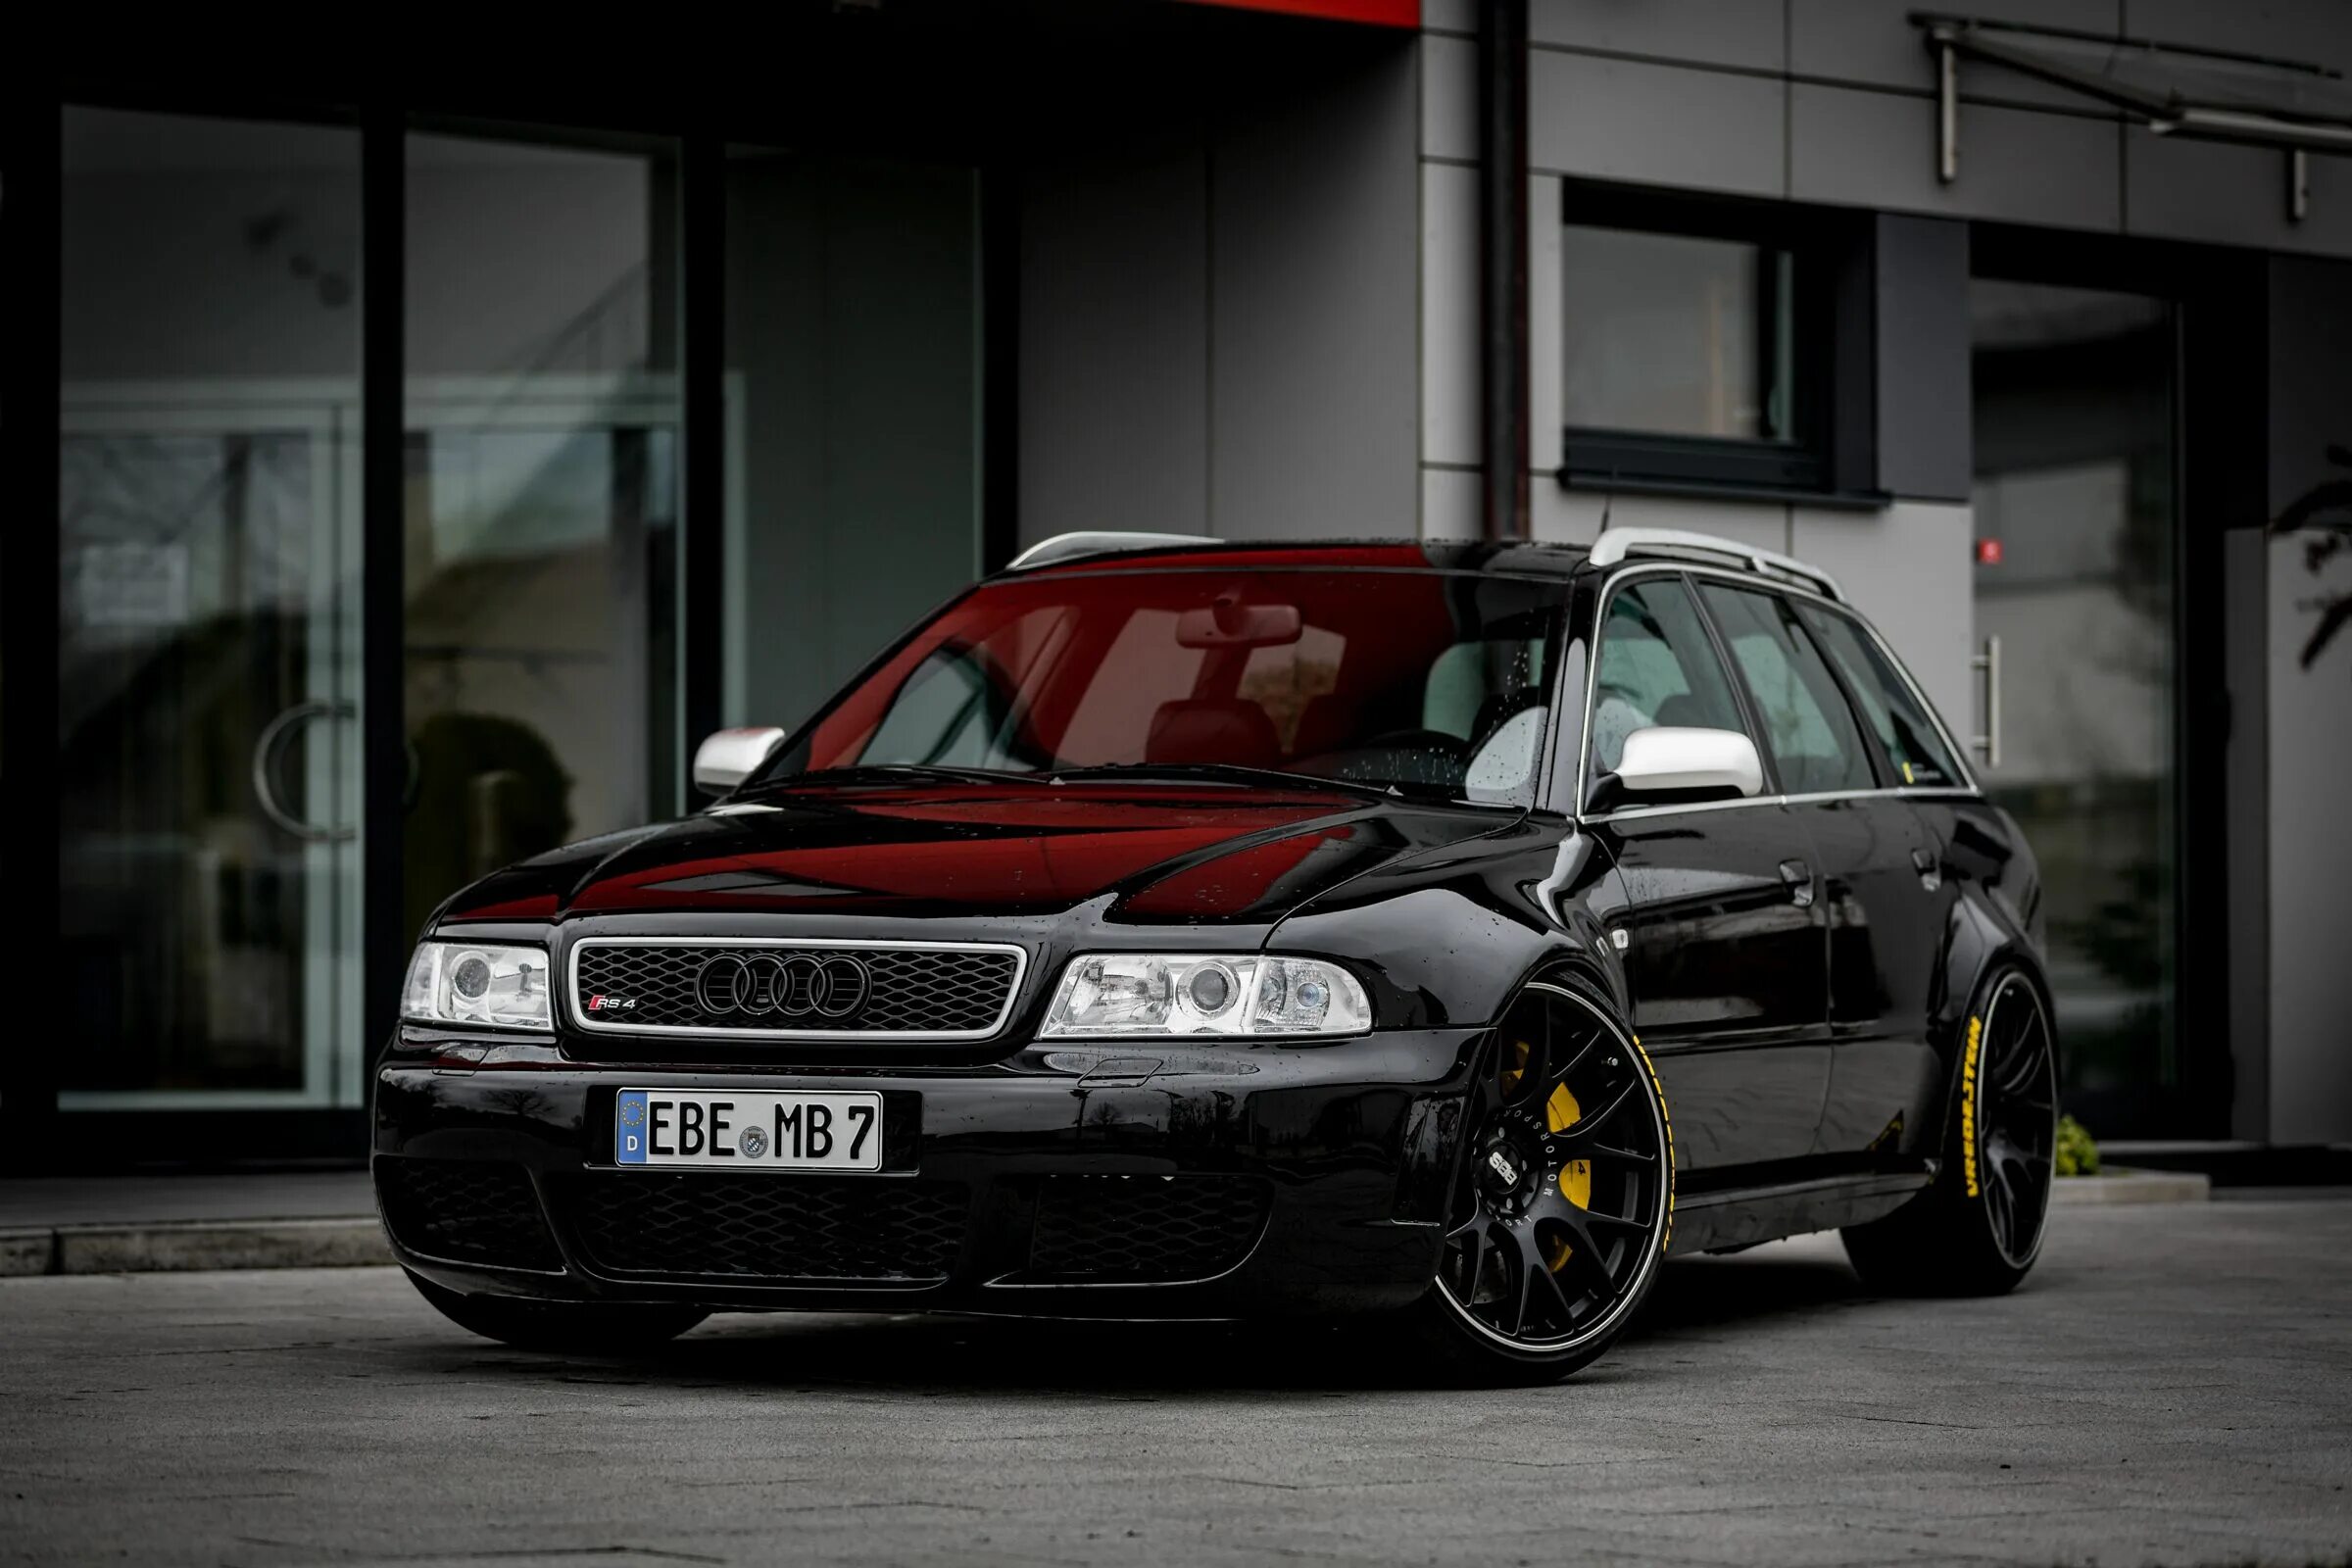 B 5 2b2 5. Audi rs4 b5. Audi rs4 b5 Black. Audi a4 b5 rs4 b5. Audi a4/rs4 (b5.